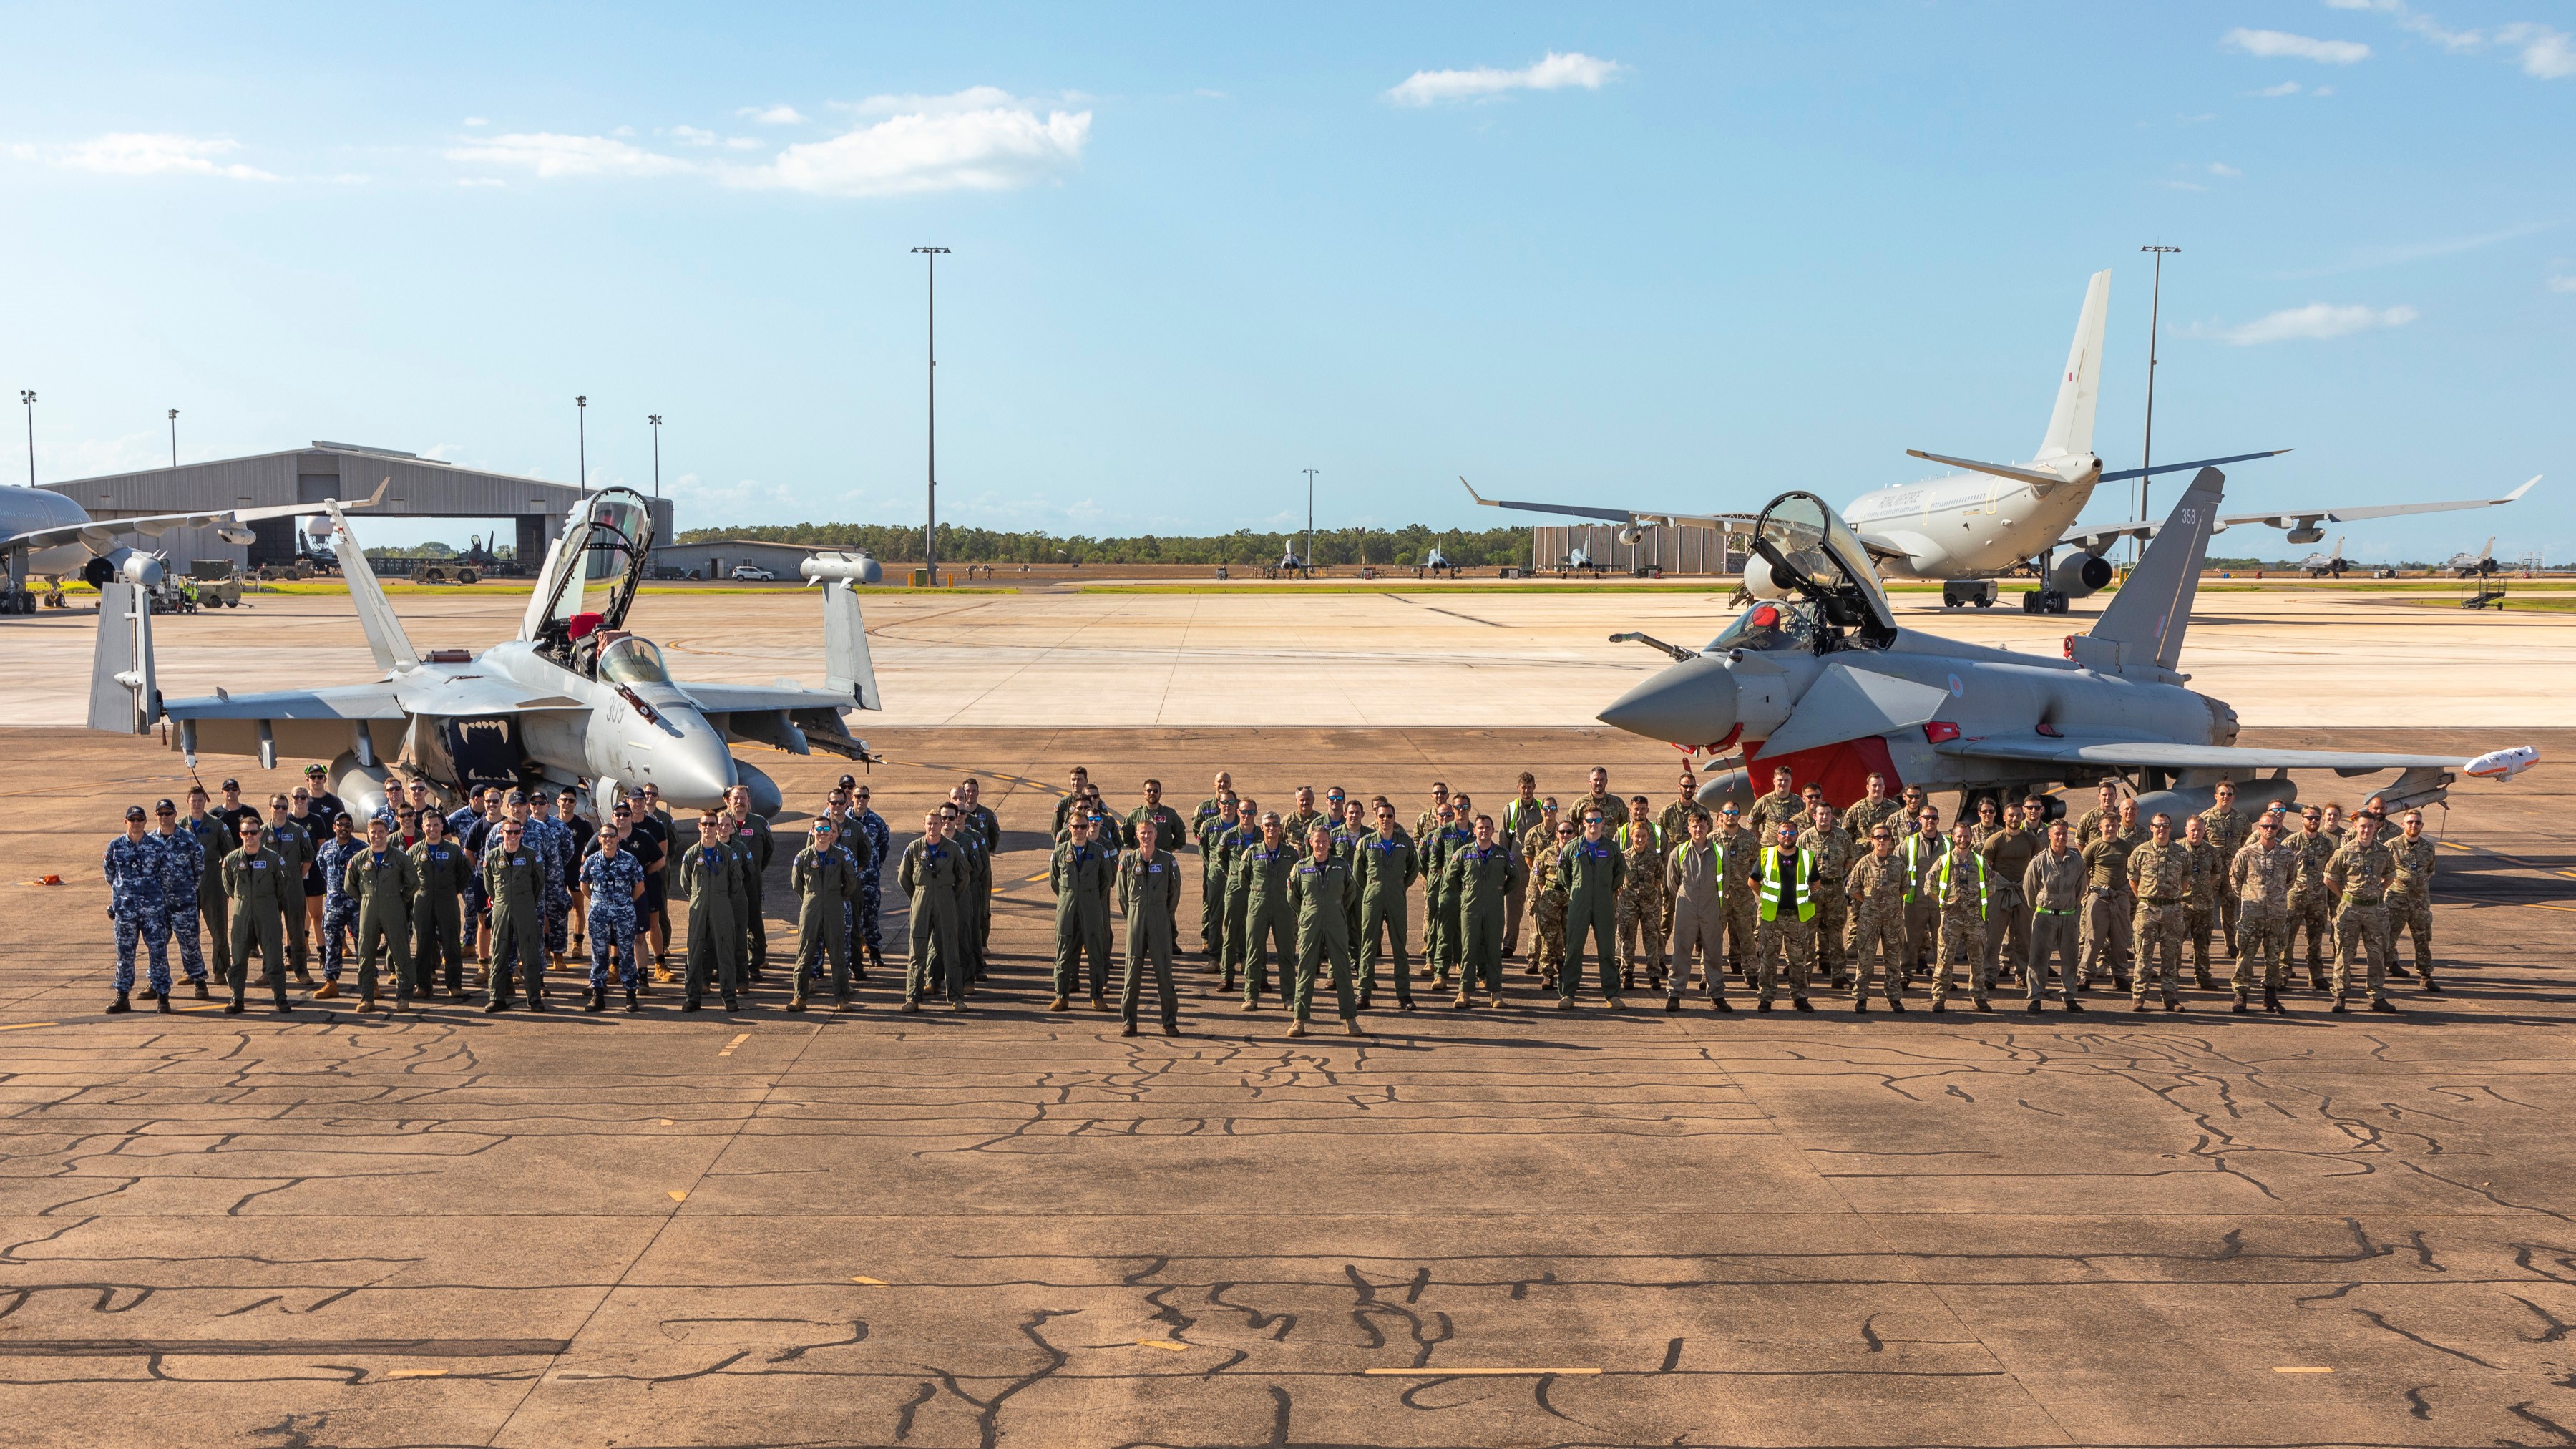 Image of a RAF Squadron in group photo on the airfield, with two Typhoons.